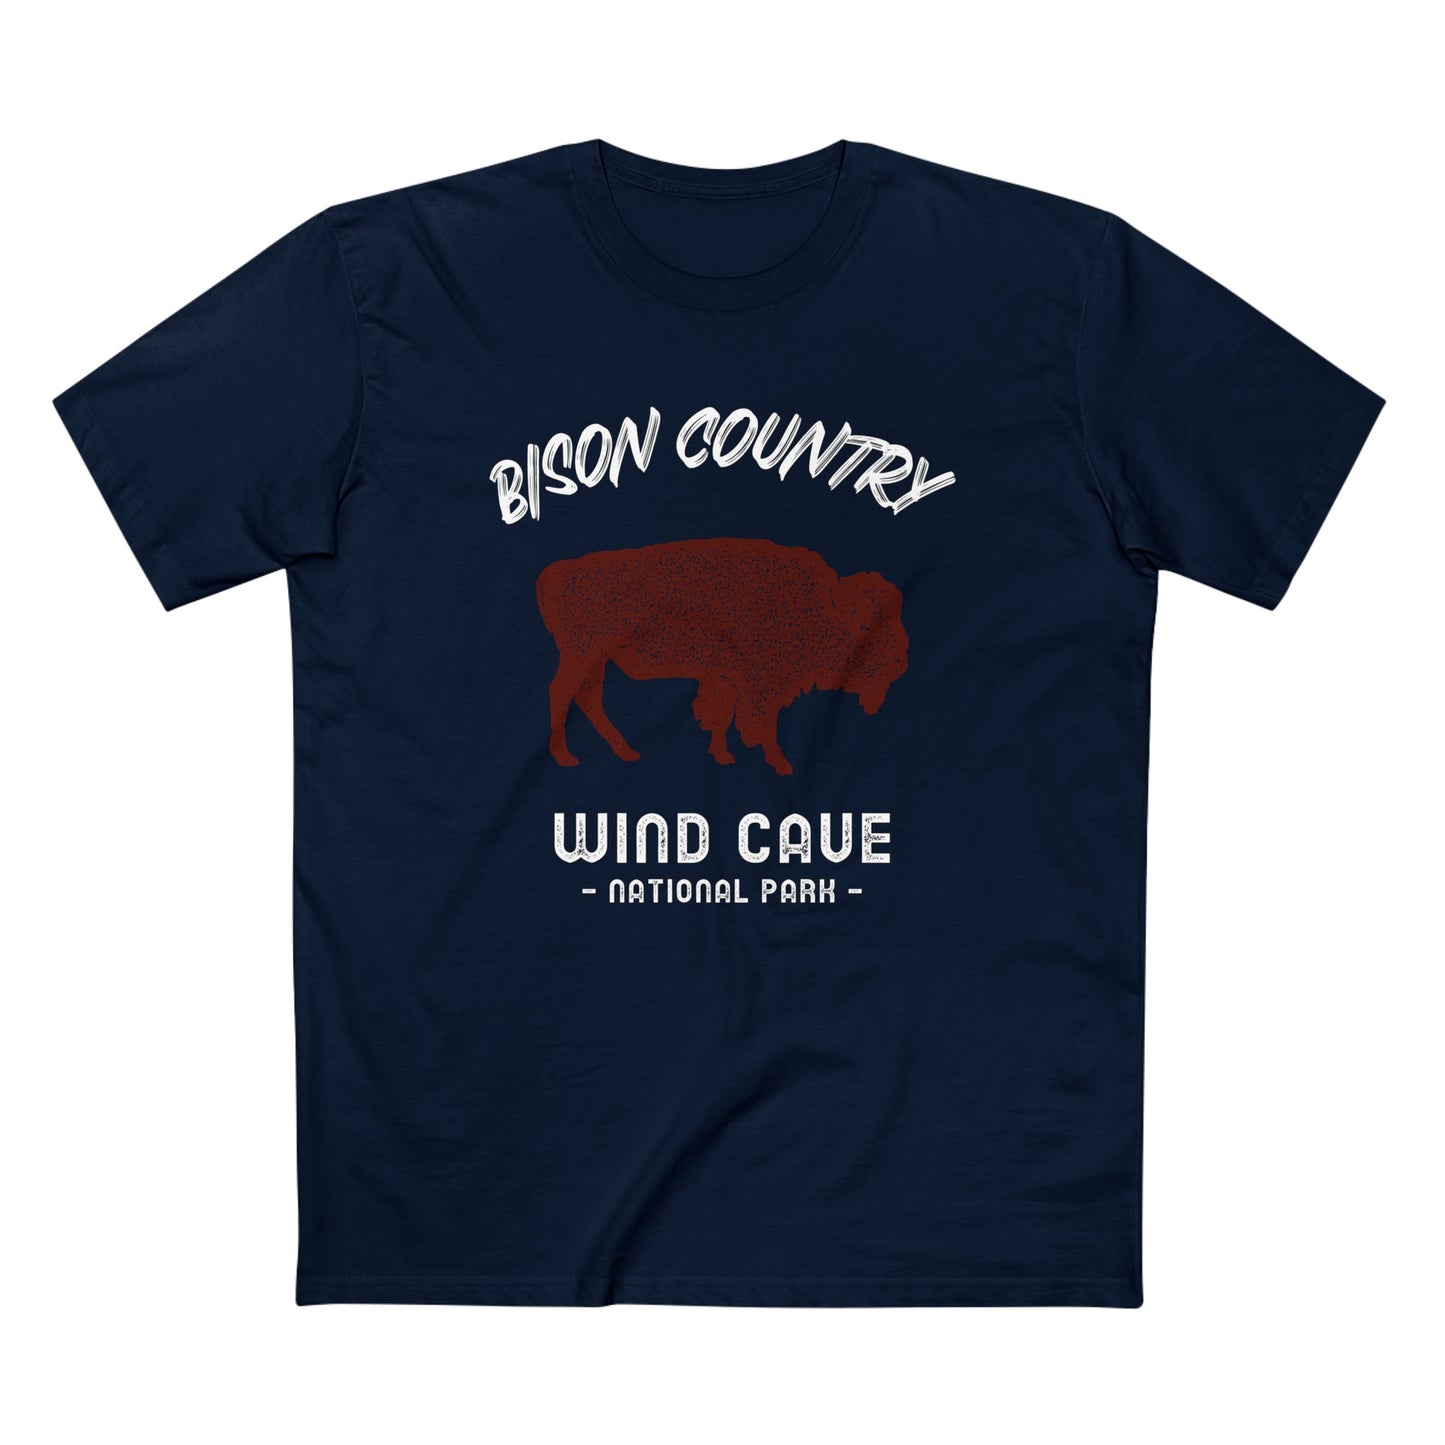 Wind Cave National Park T-Shirt - Bison Country